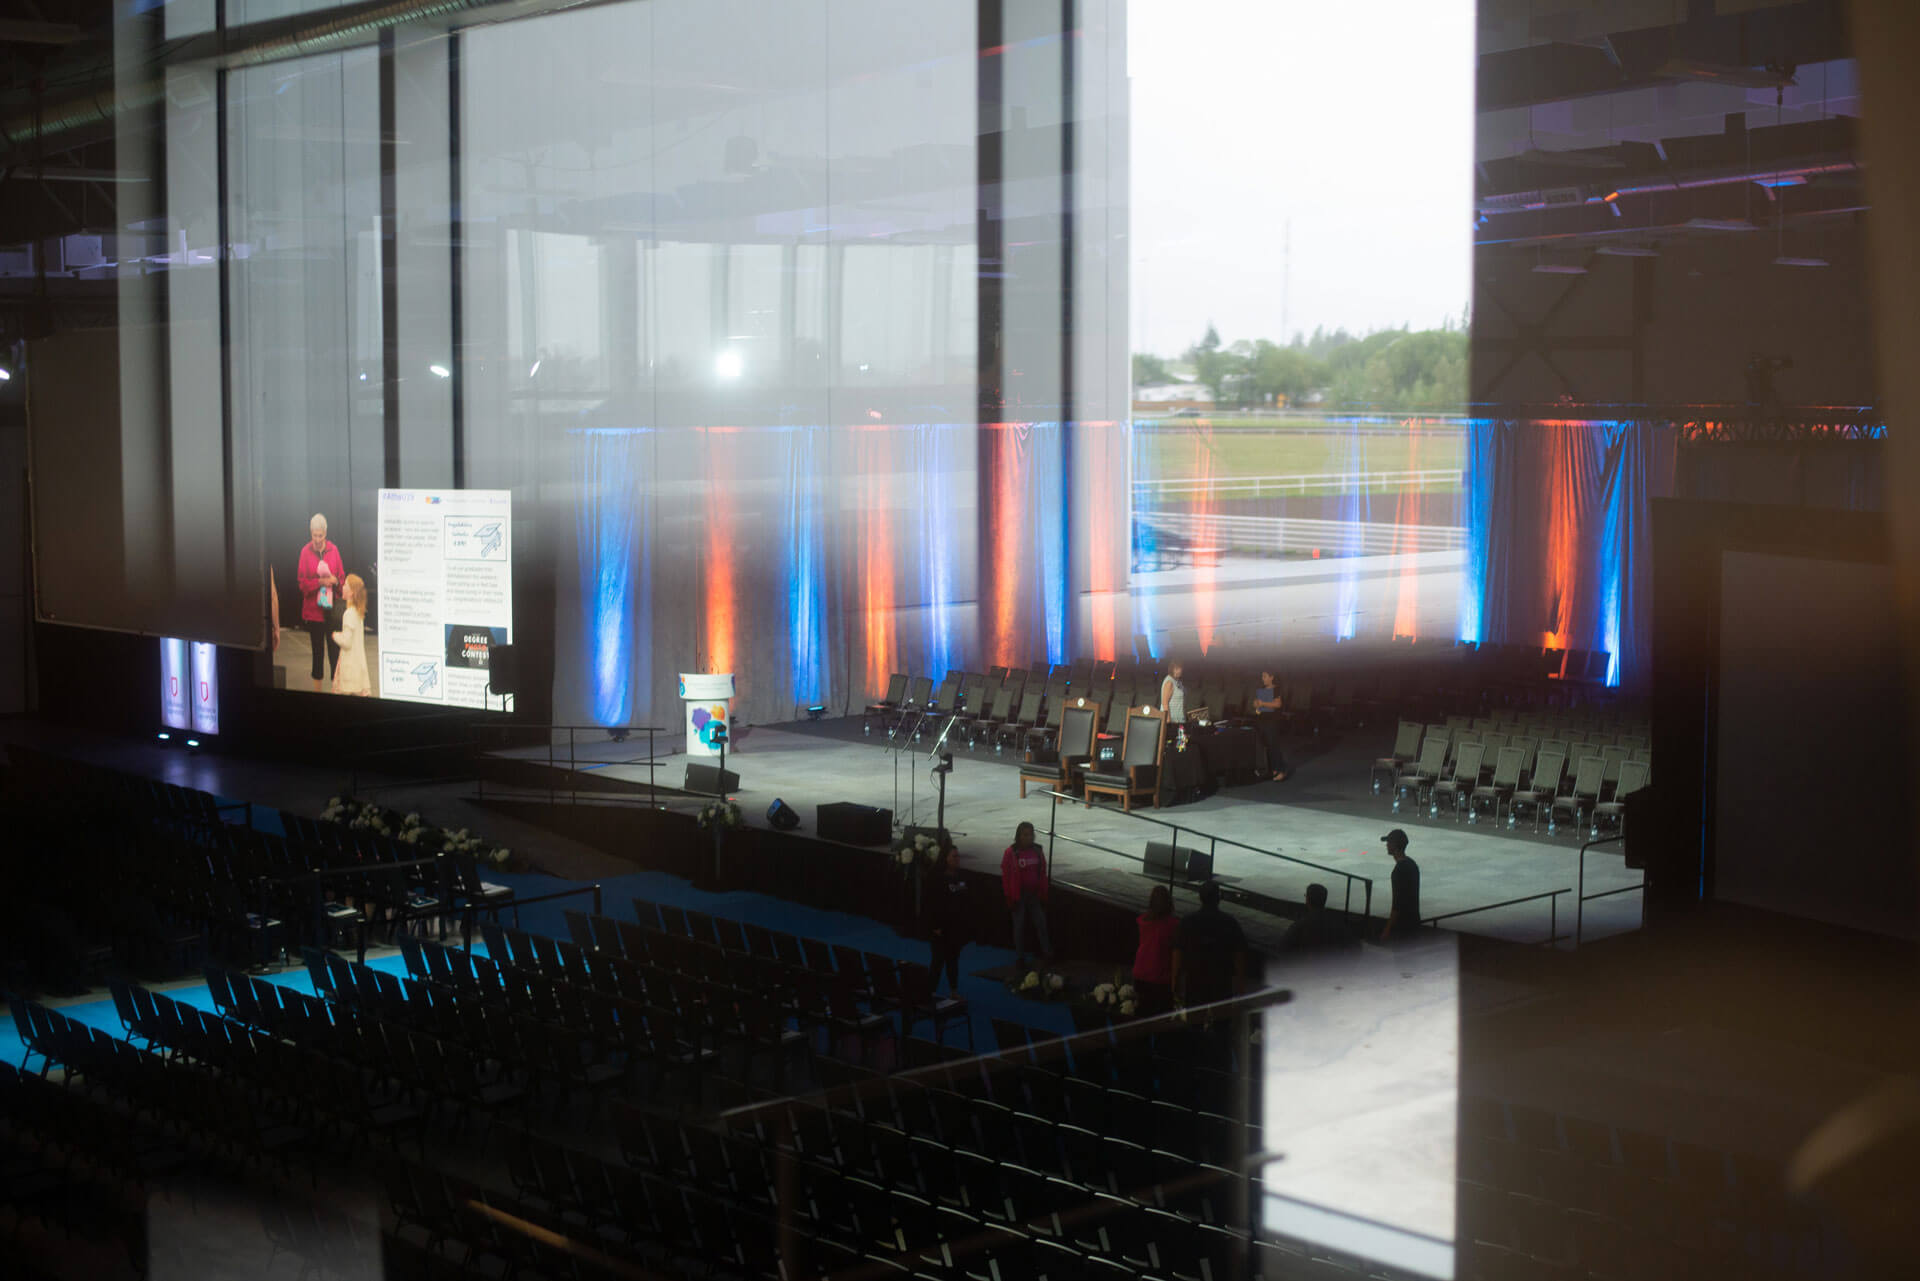 Image of the convocation stage in 2019.